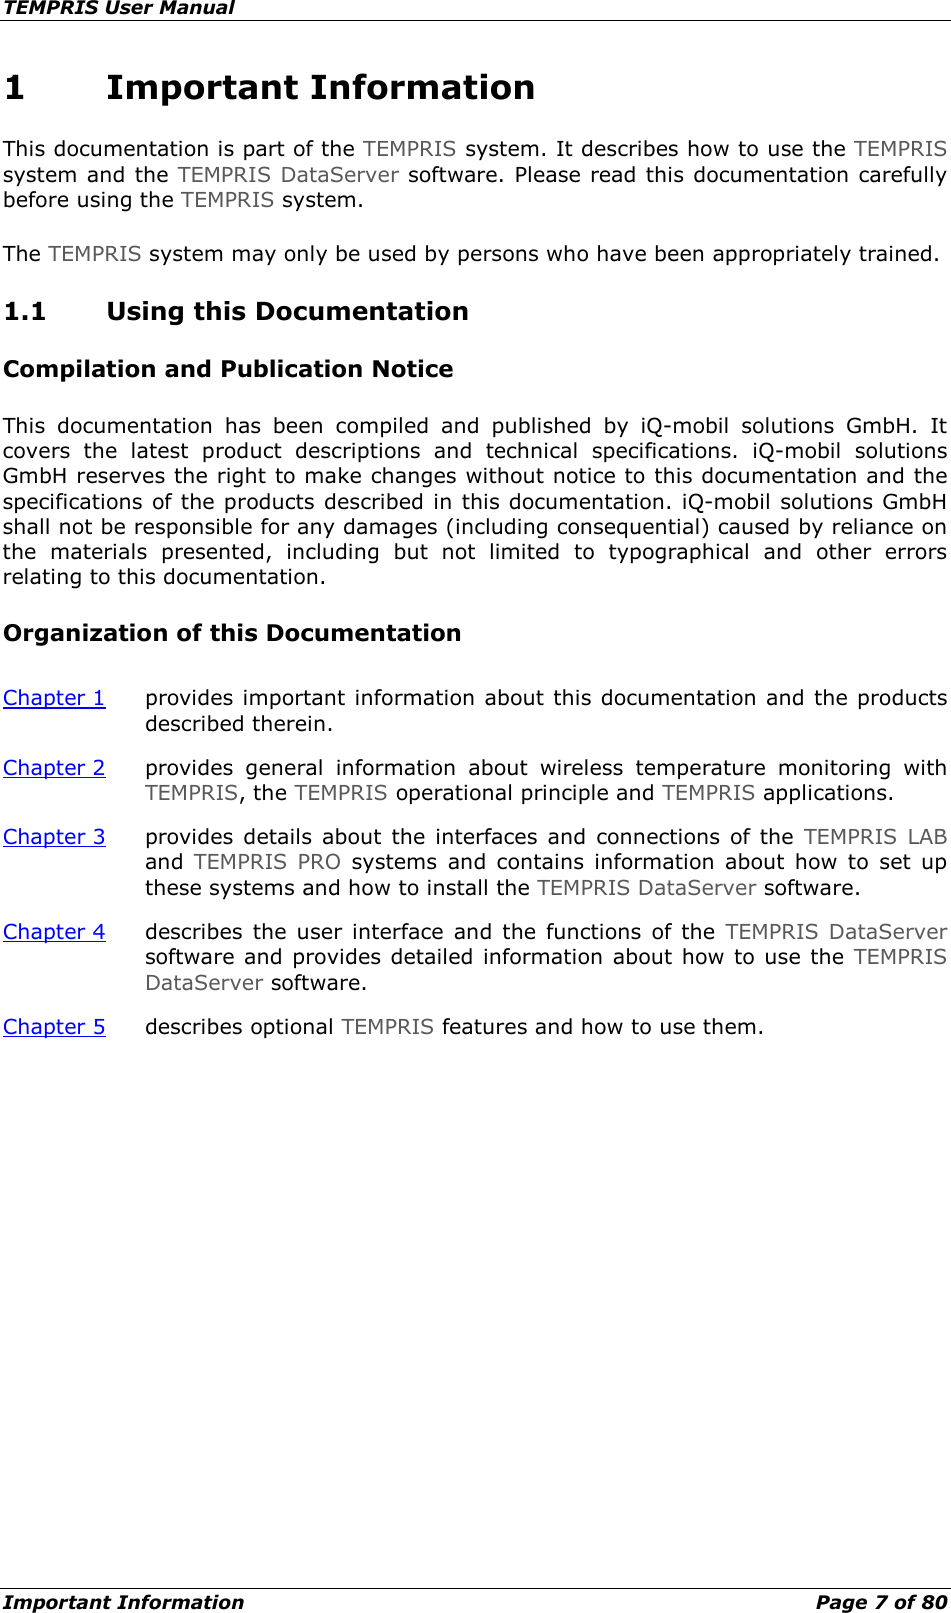 TEMPRIS User Manual Important Information    Page 7 of 80 1 Important Information This documentation is part of the TEMPRIS system. It describes how to use the TEMPRIS system and the TEMPRIS DataServer software. Please read this documentation carefully before using the TEMPRIS system. The TEMPRIS system may only be used by persons who have been appropriately trained. 1.1 Using this Documentation Compilation and Publication Notice This documentation has been compiled and published by iQ-mobil solutions GmbH. It covers the latest product descriptions and technical specifications. iQ-mobil solutions GmbH reserves the right to make changes without notice to this documentation and the specifications of the products described in this documentation. iQ-mobil solutions GmbH shall not be responsible for any damages (including consequential) caused by reliance on the materials presented, including but not limited to typographical and other errors relating to this documentation. Organization of this Documentation Chapter 1 provides important information about this documentation and the products described therein. Chapter 2 provides general information about wireless temperature monitoring with TEMPRIS, the TEMPRIS operational principle and TEMPRIS applications. Chapter 3 provides details about the interfaces and connections of the TEMPRIS LAB and  TEMPRIS PRO systems and contains information about how to set up these systems and how to install the TEMPRIS DataServer software. Chapter 4 describes the user interface and the functions of the TEMPRIS DataServer software and provides detailed information about how to use the TEMPRIS DataServer software. Chapter 5 describes optional TEMPRIS features and how to use them.     